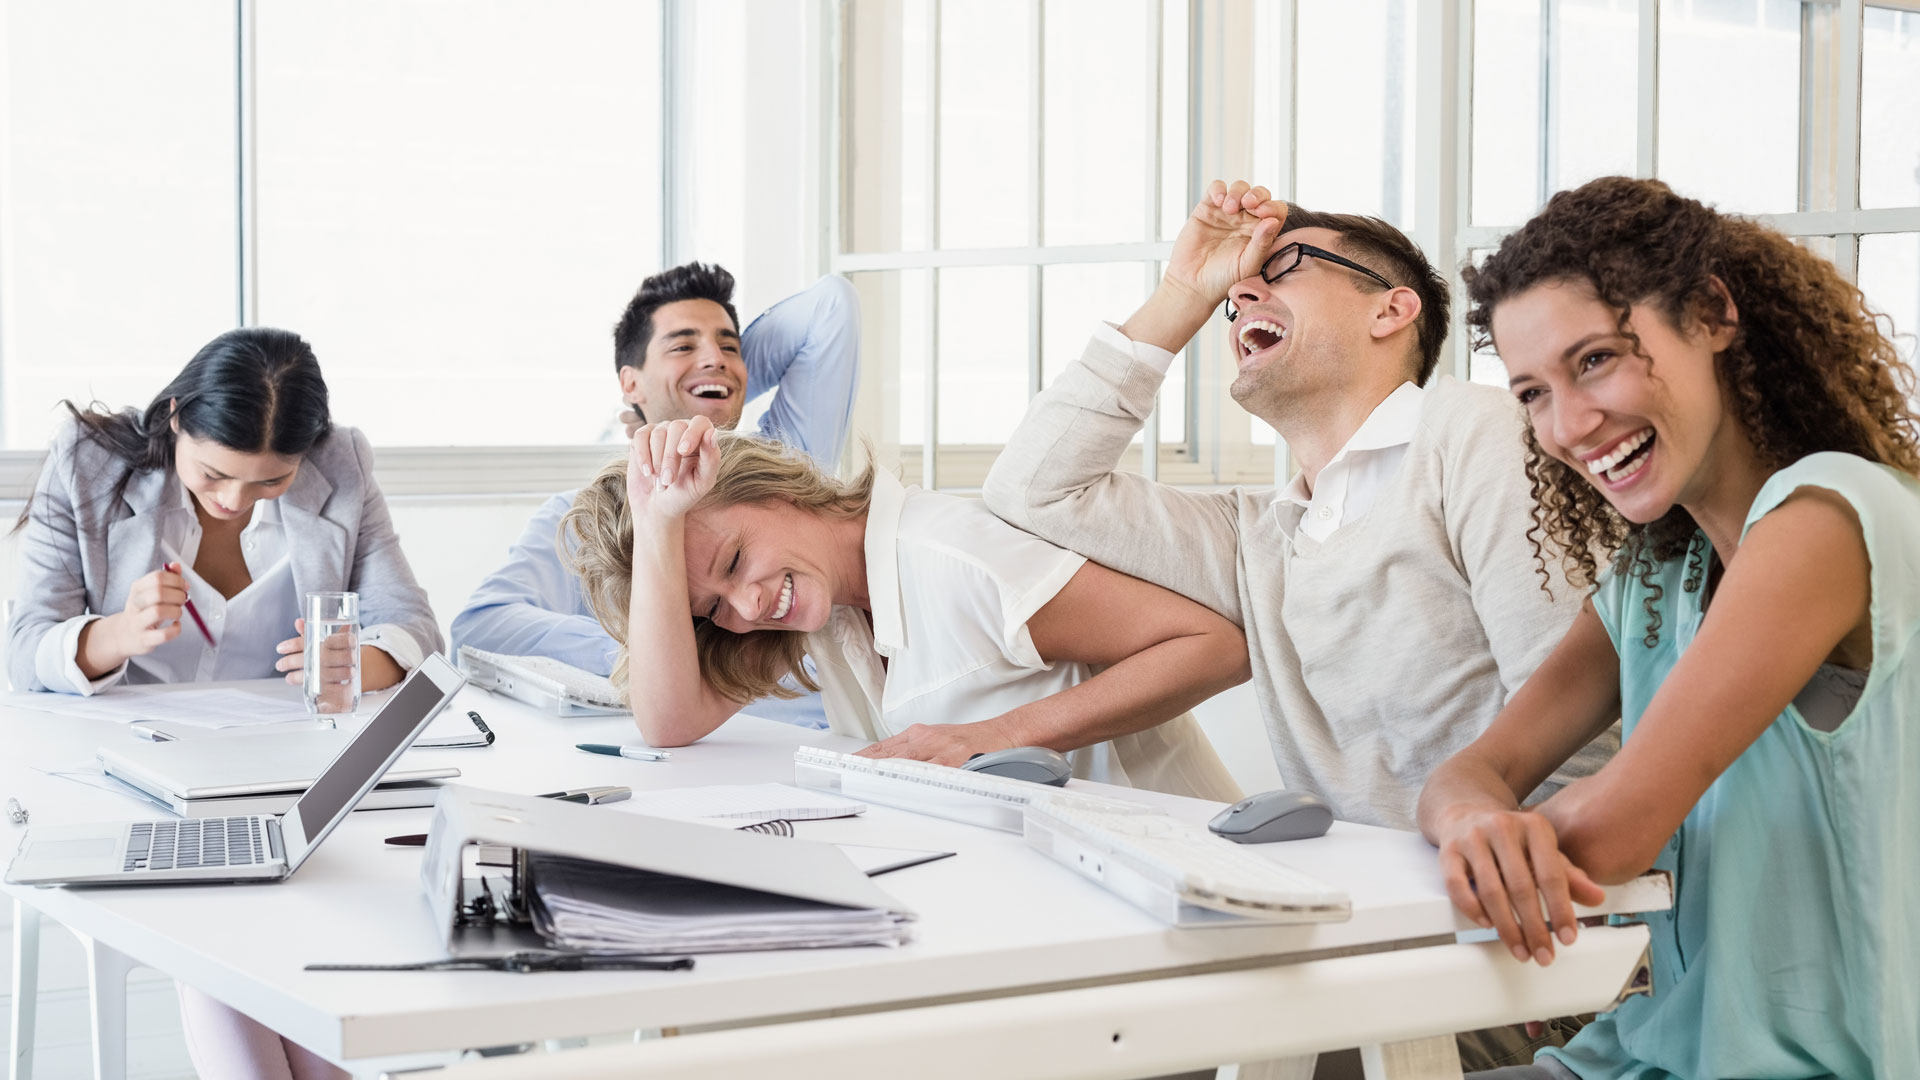 People laughing in a meeting